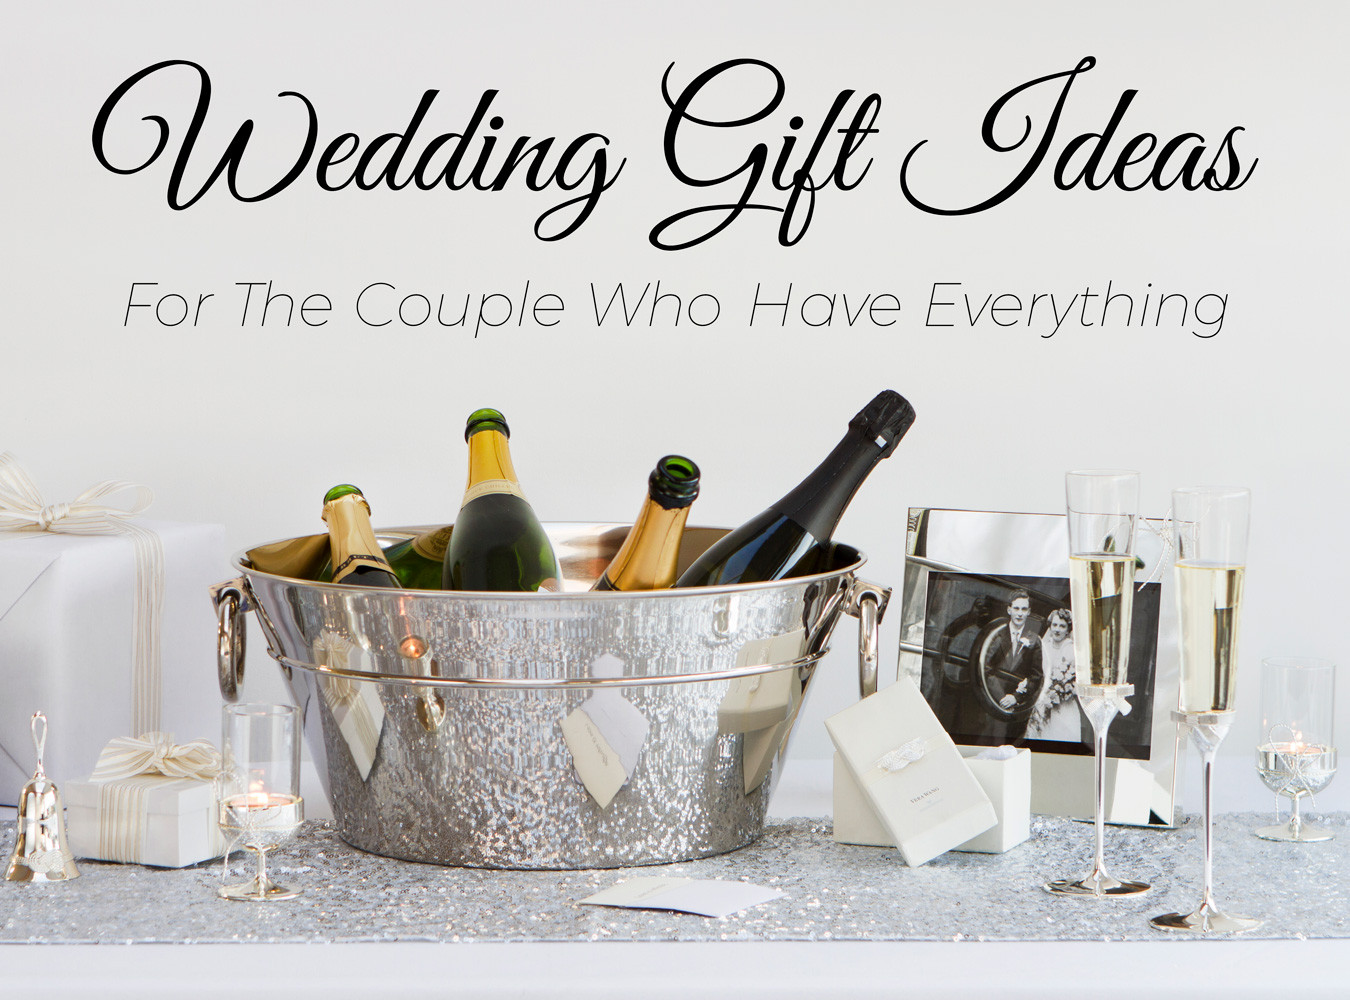 Wedding Gift Ideas Couple
 5 Wedding Gift Ideas for the Couple Who Have Everything